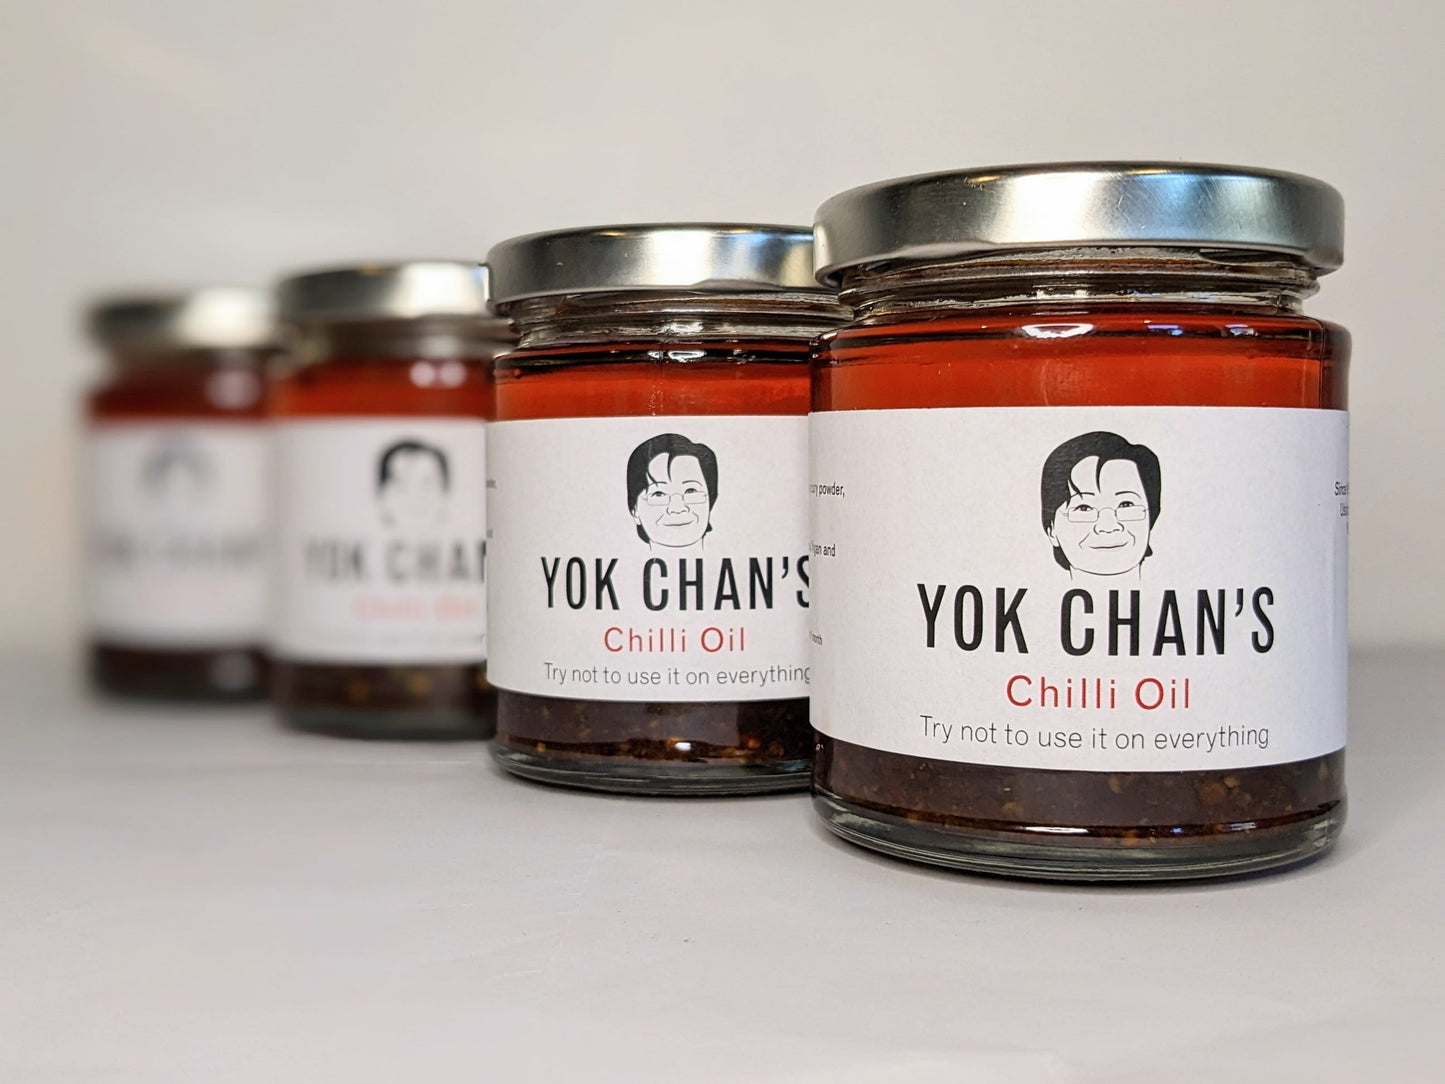 Four jars of Yok Chan's Chilli Oil right jar in focus